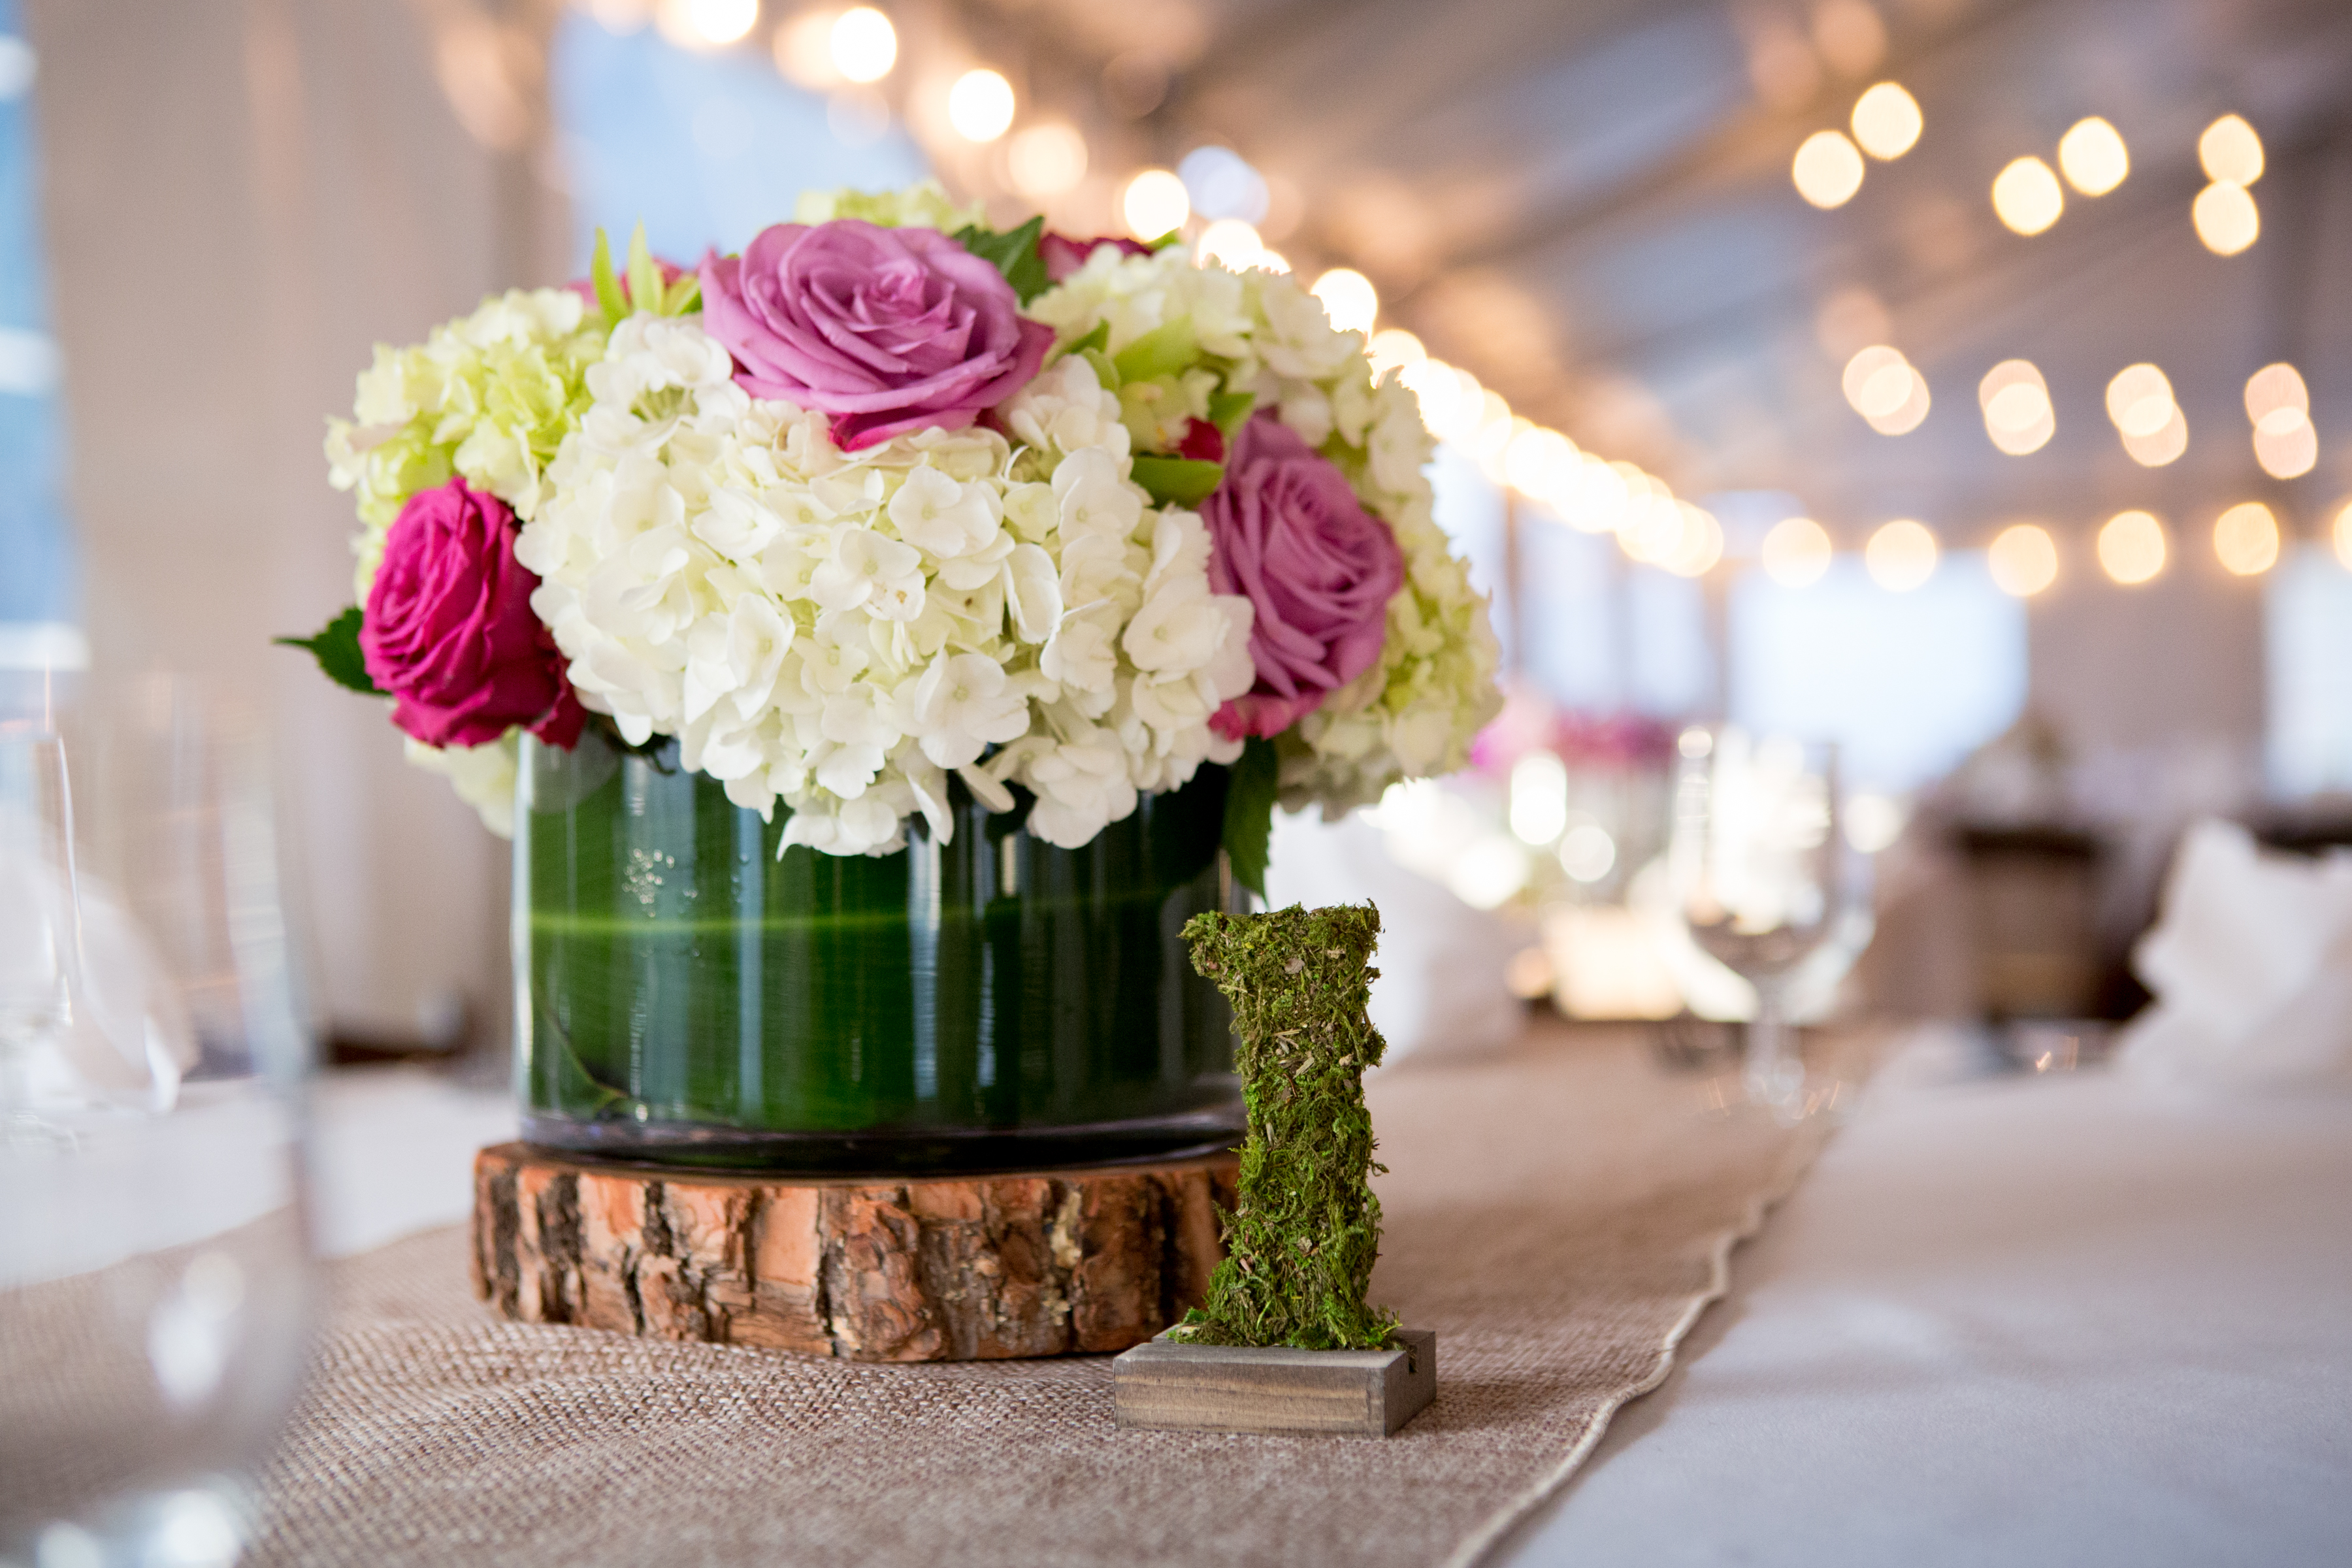 Centerpieces and table numbers at Maddie's Rustic Pink and purple Bat Mitzvah at Rocklands Farms in Poolsville, MD | Pop Color Events | Adding a Pop of Color to Bar & Bat Mitzvahs in DC, MD, and VA | Photo by Jessica Latos Photography